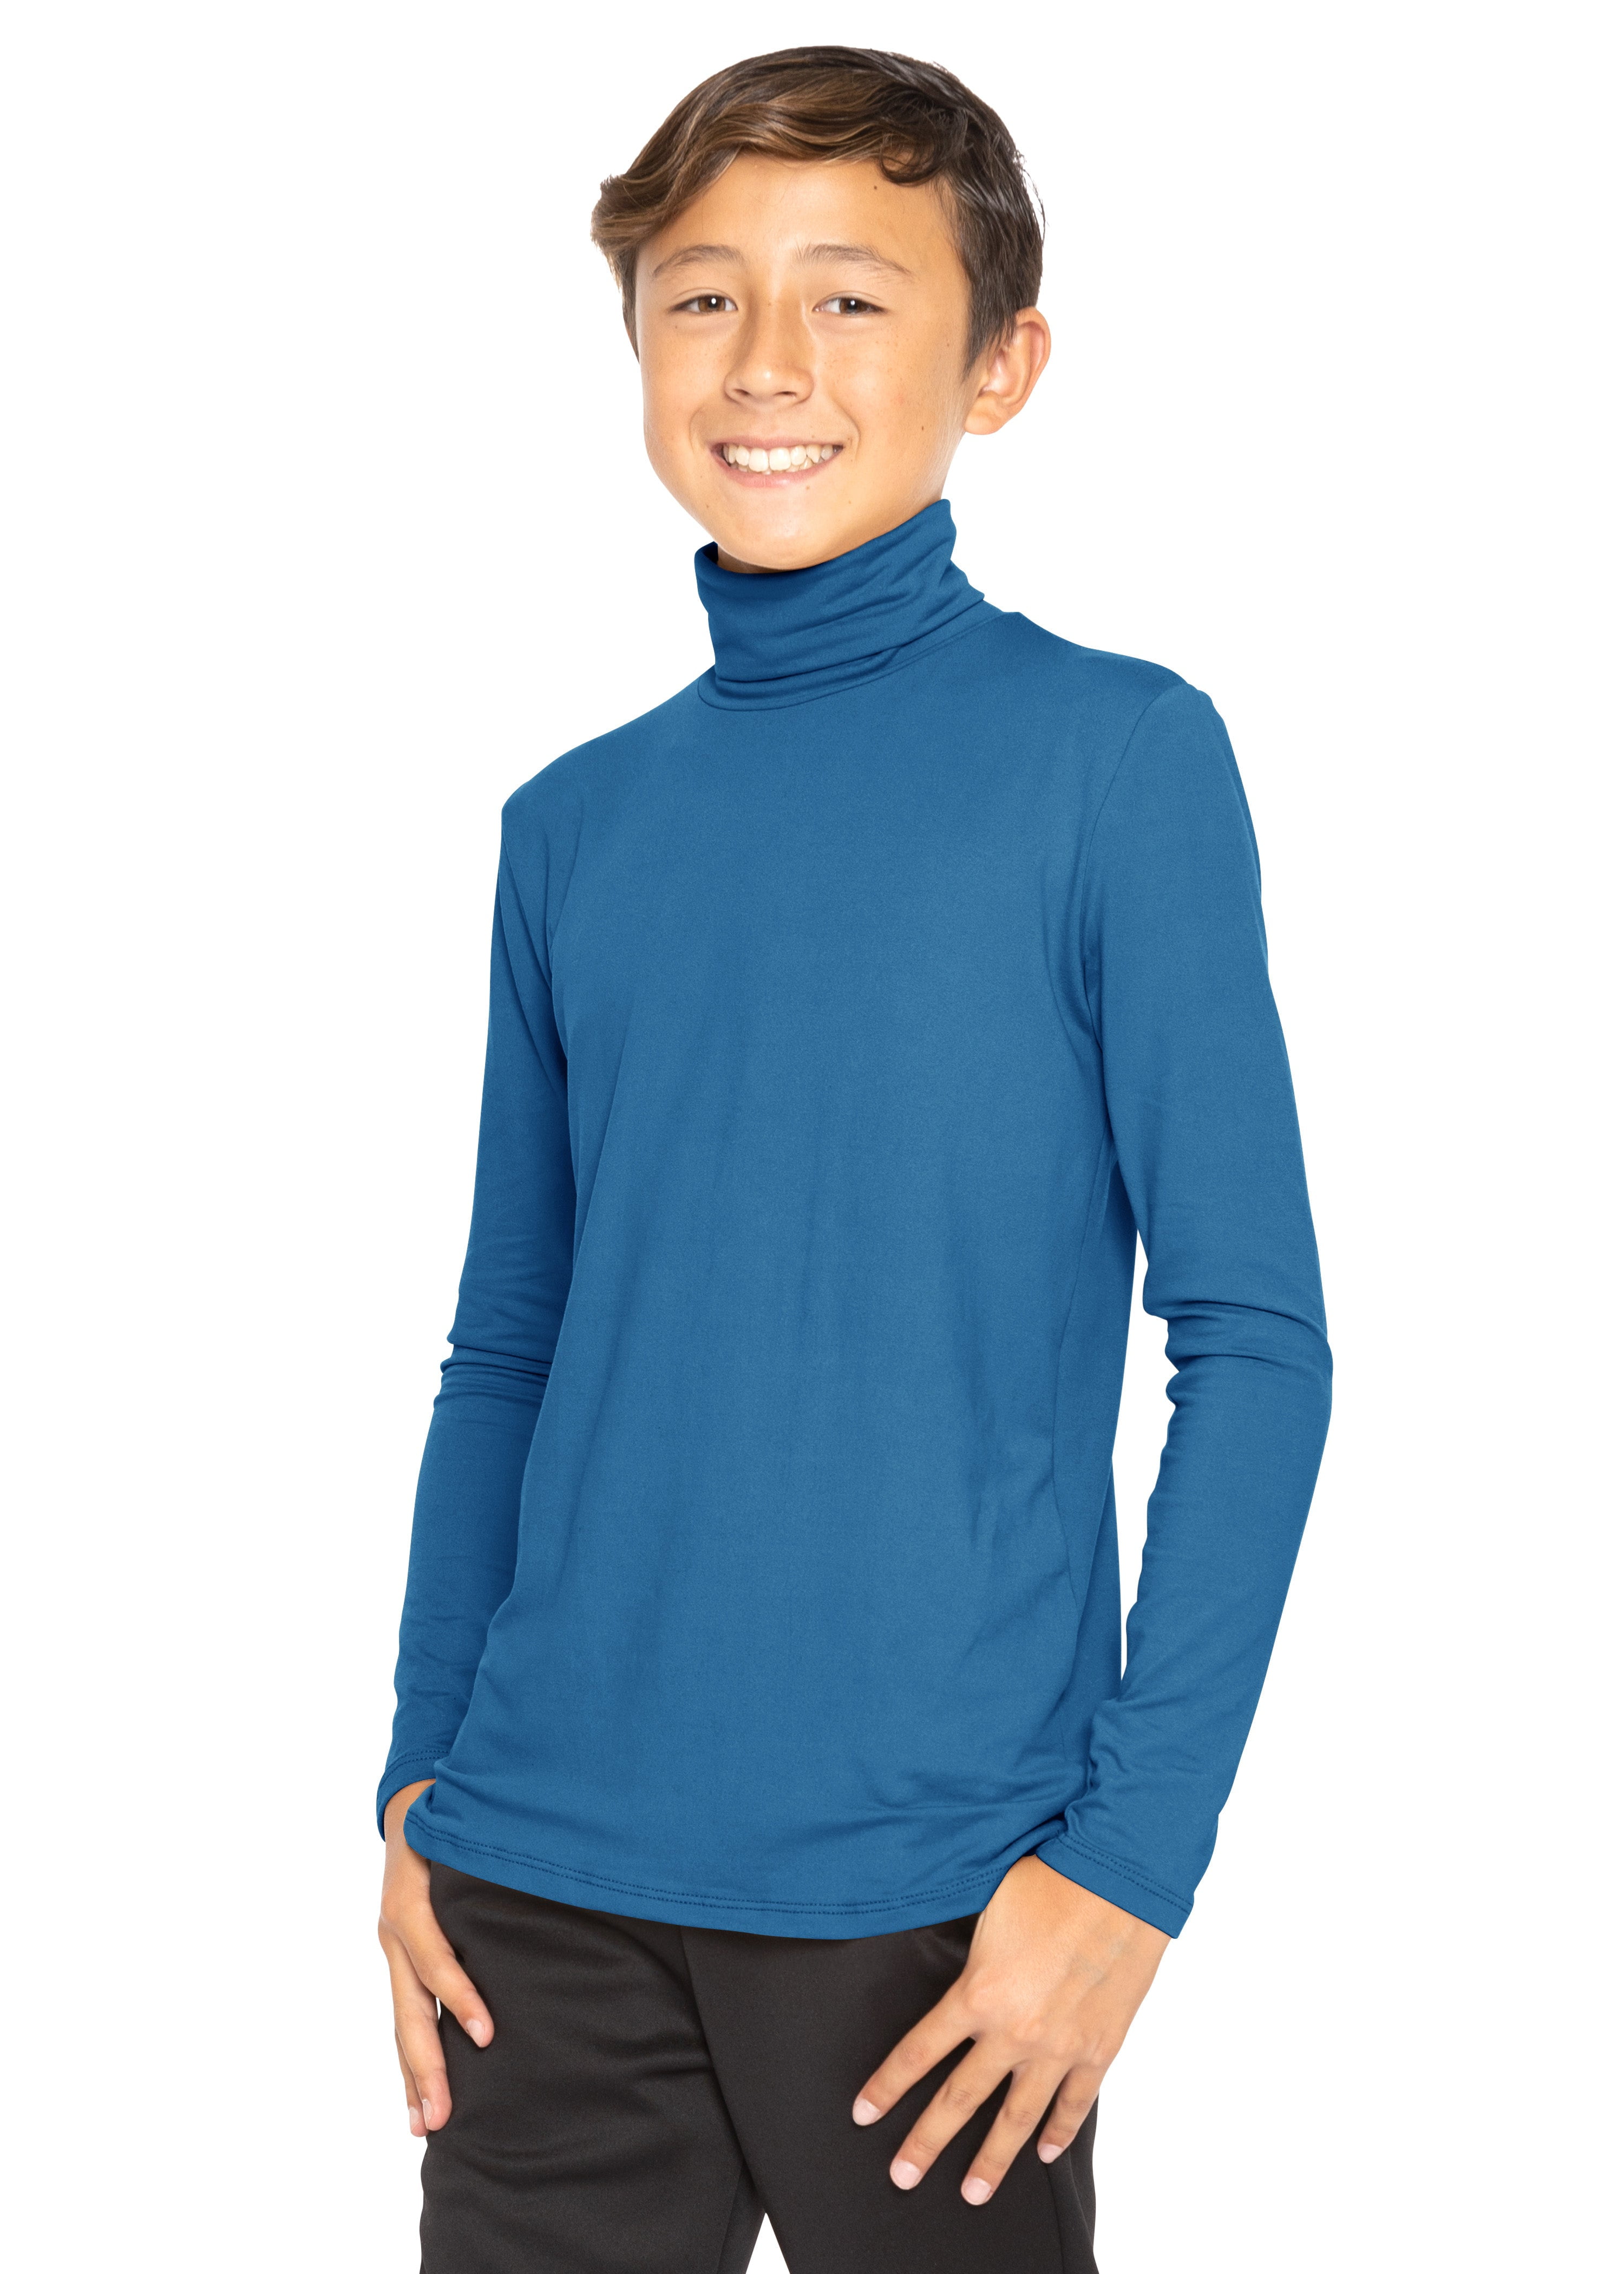 Stretch Is Comfort Oh so Soft Boy's Long Sleeve Turtleneck